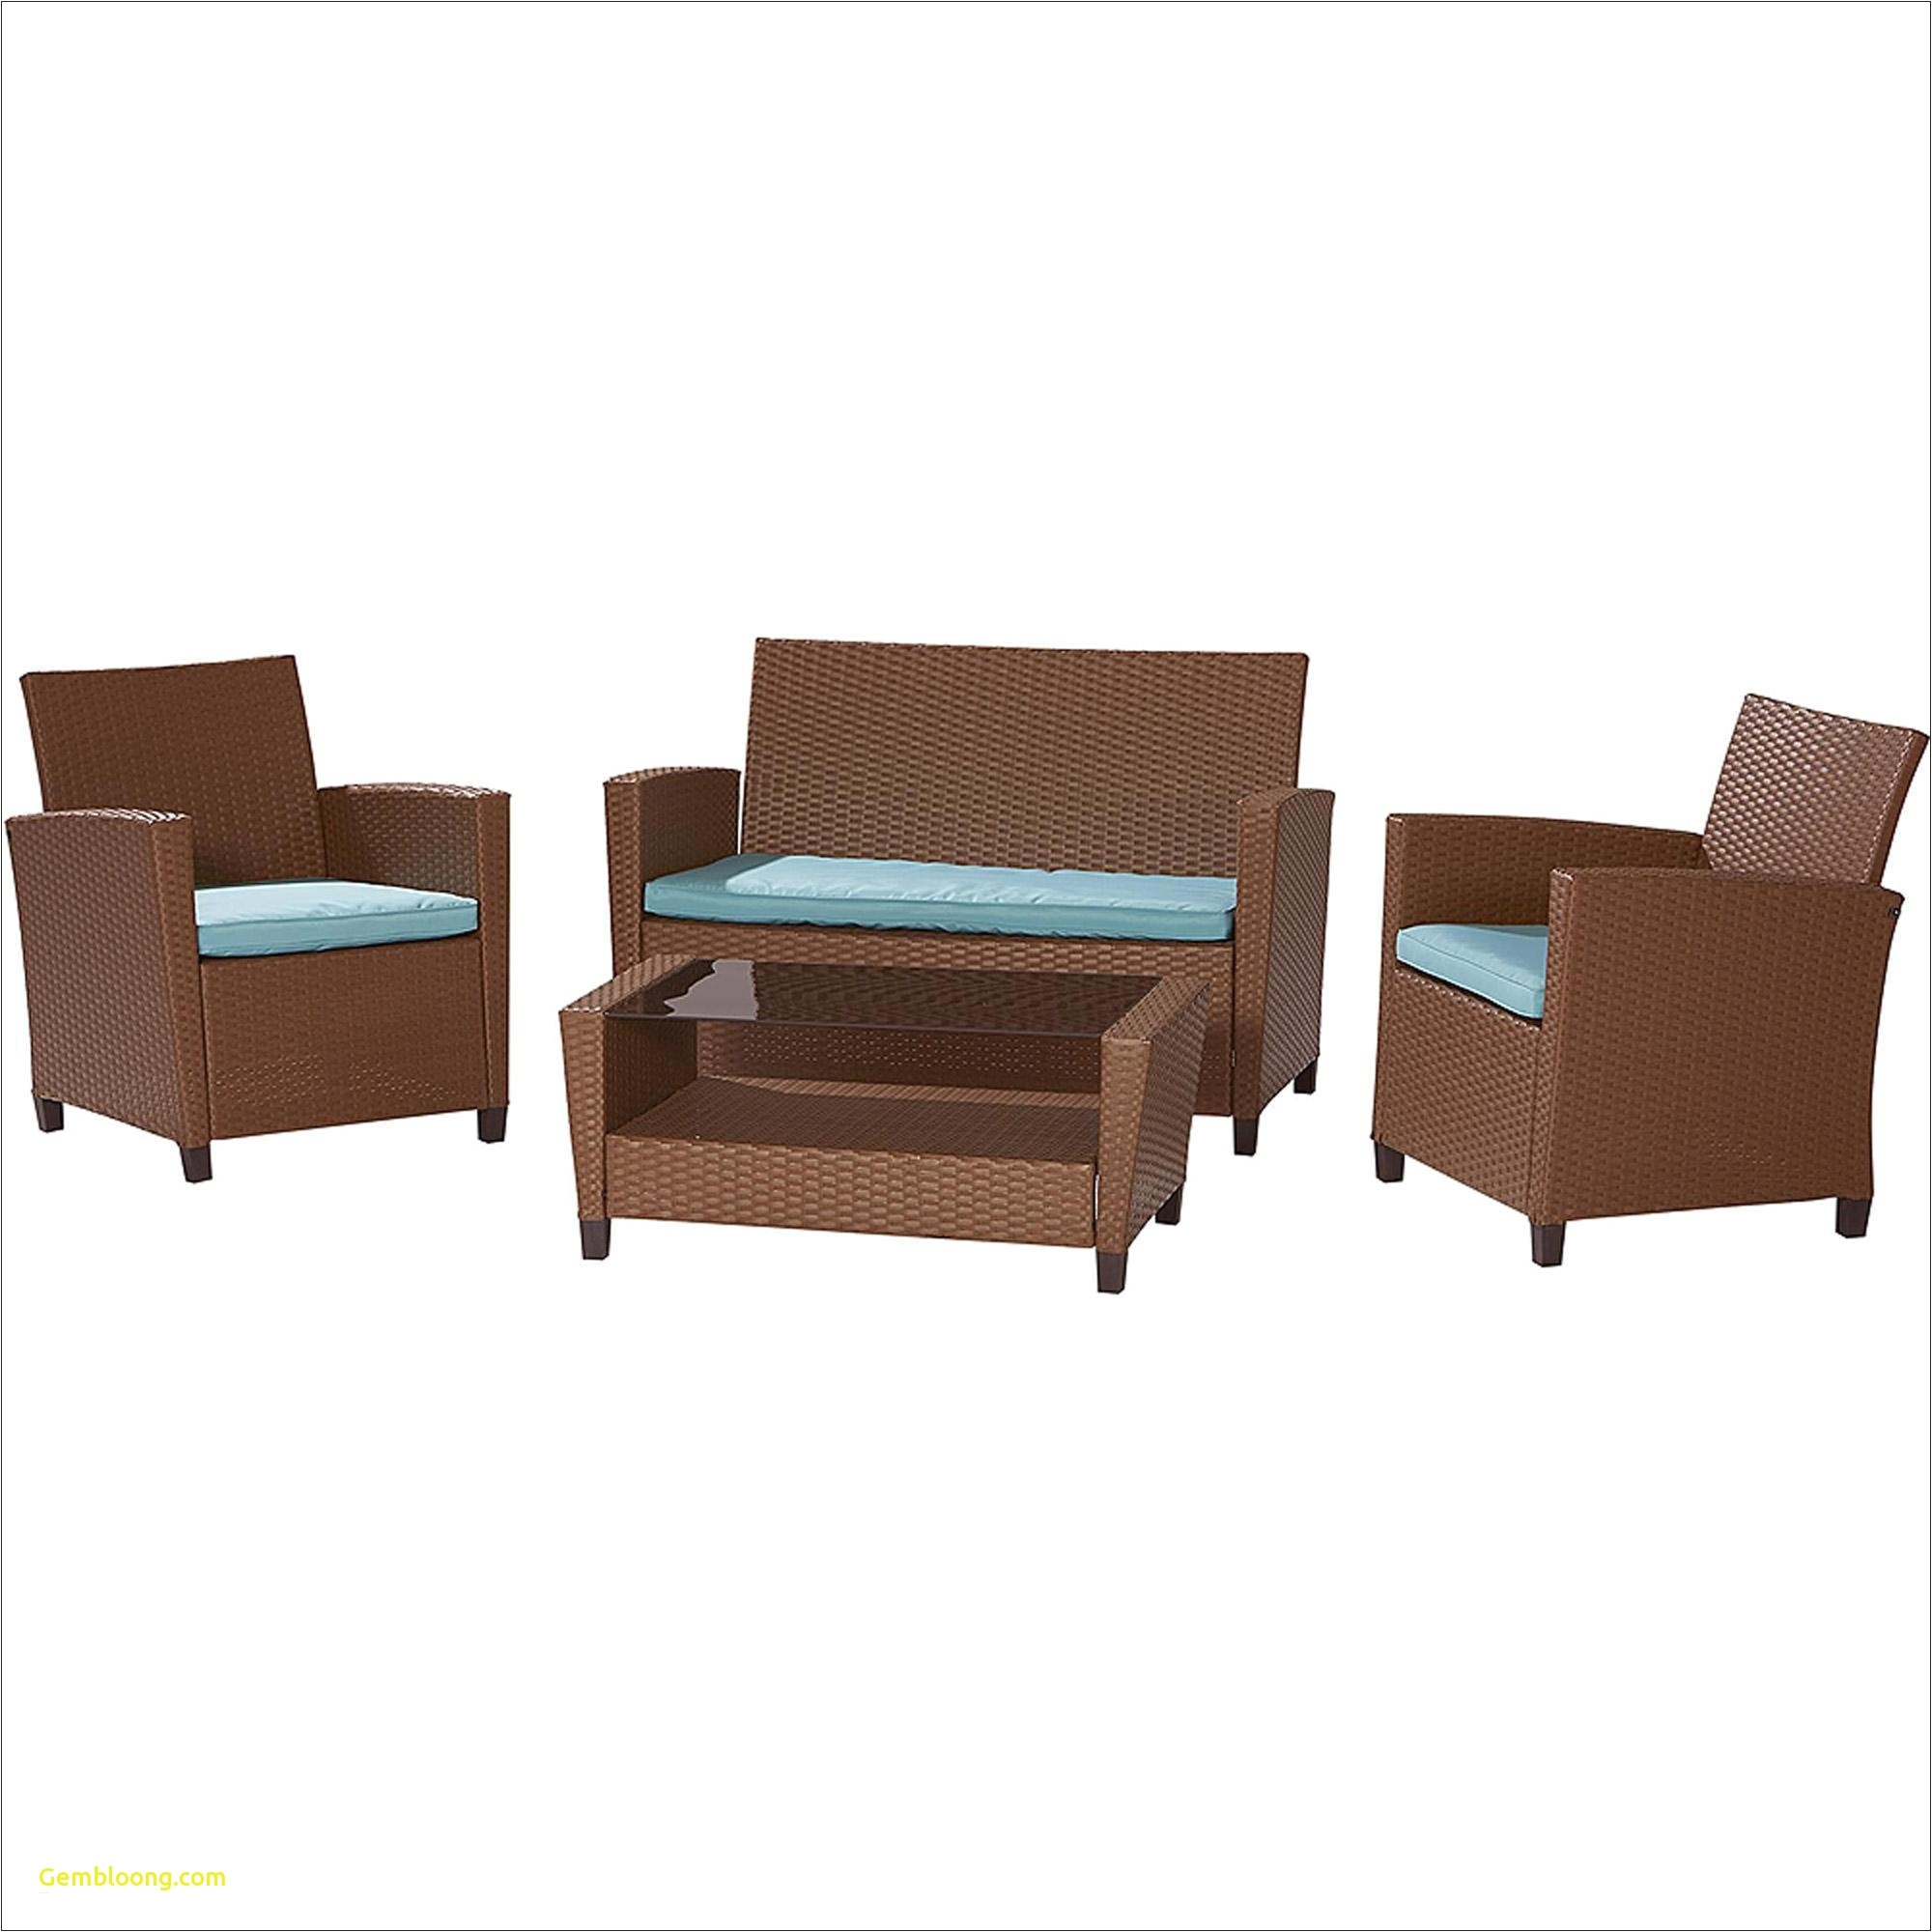 home design palm casual patio furniture elegant 24 gorgeous palm scheme of outdoor furniture fort myers